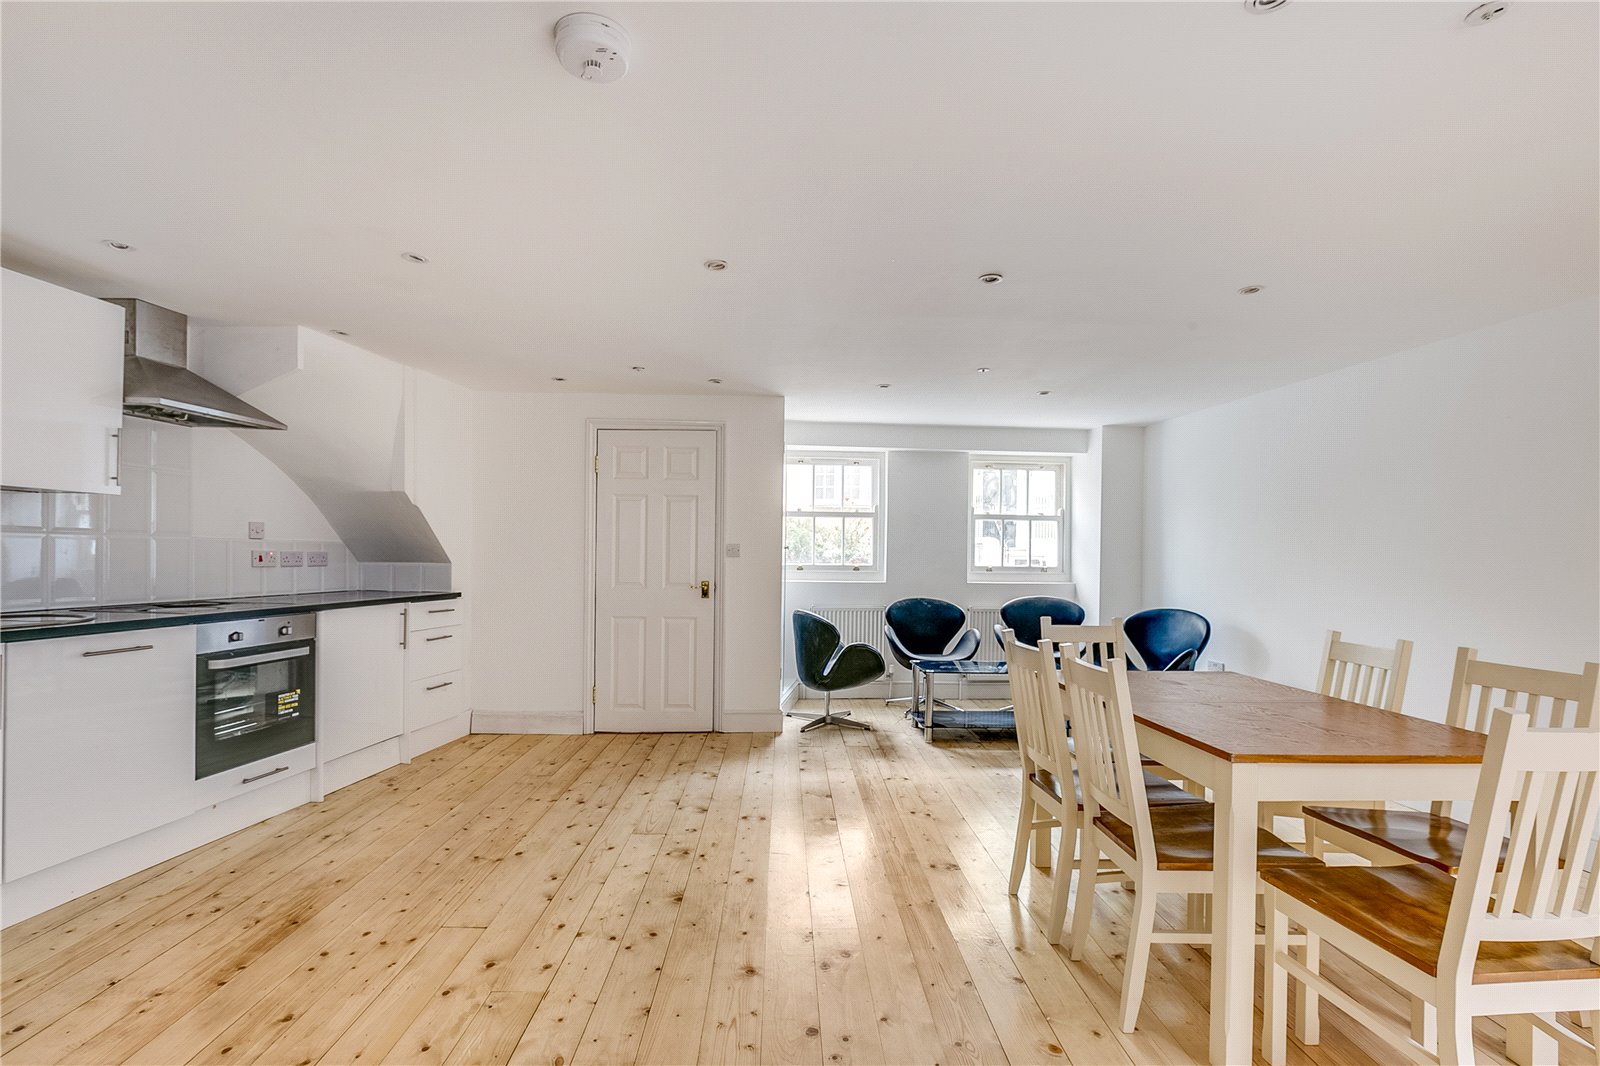 A brand newly refurbished four-bedroom mews house.